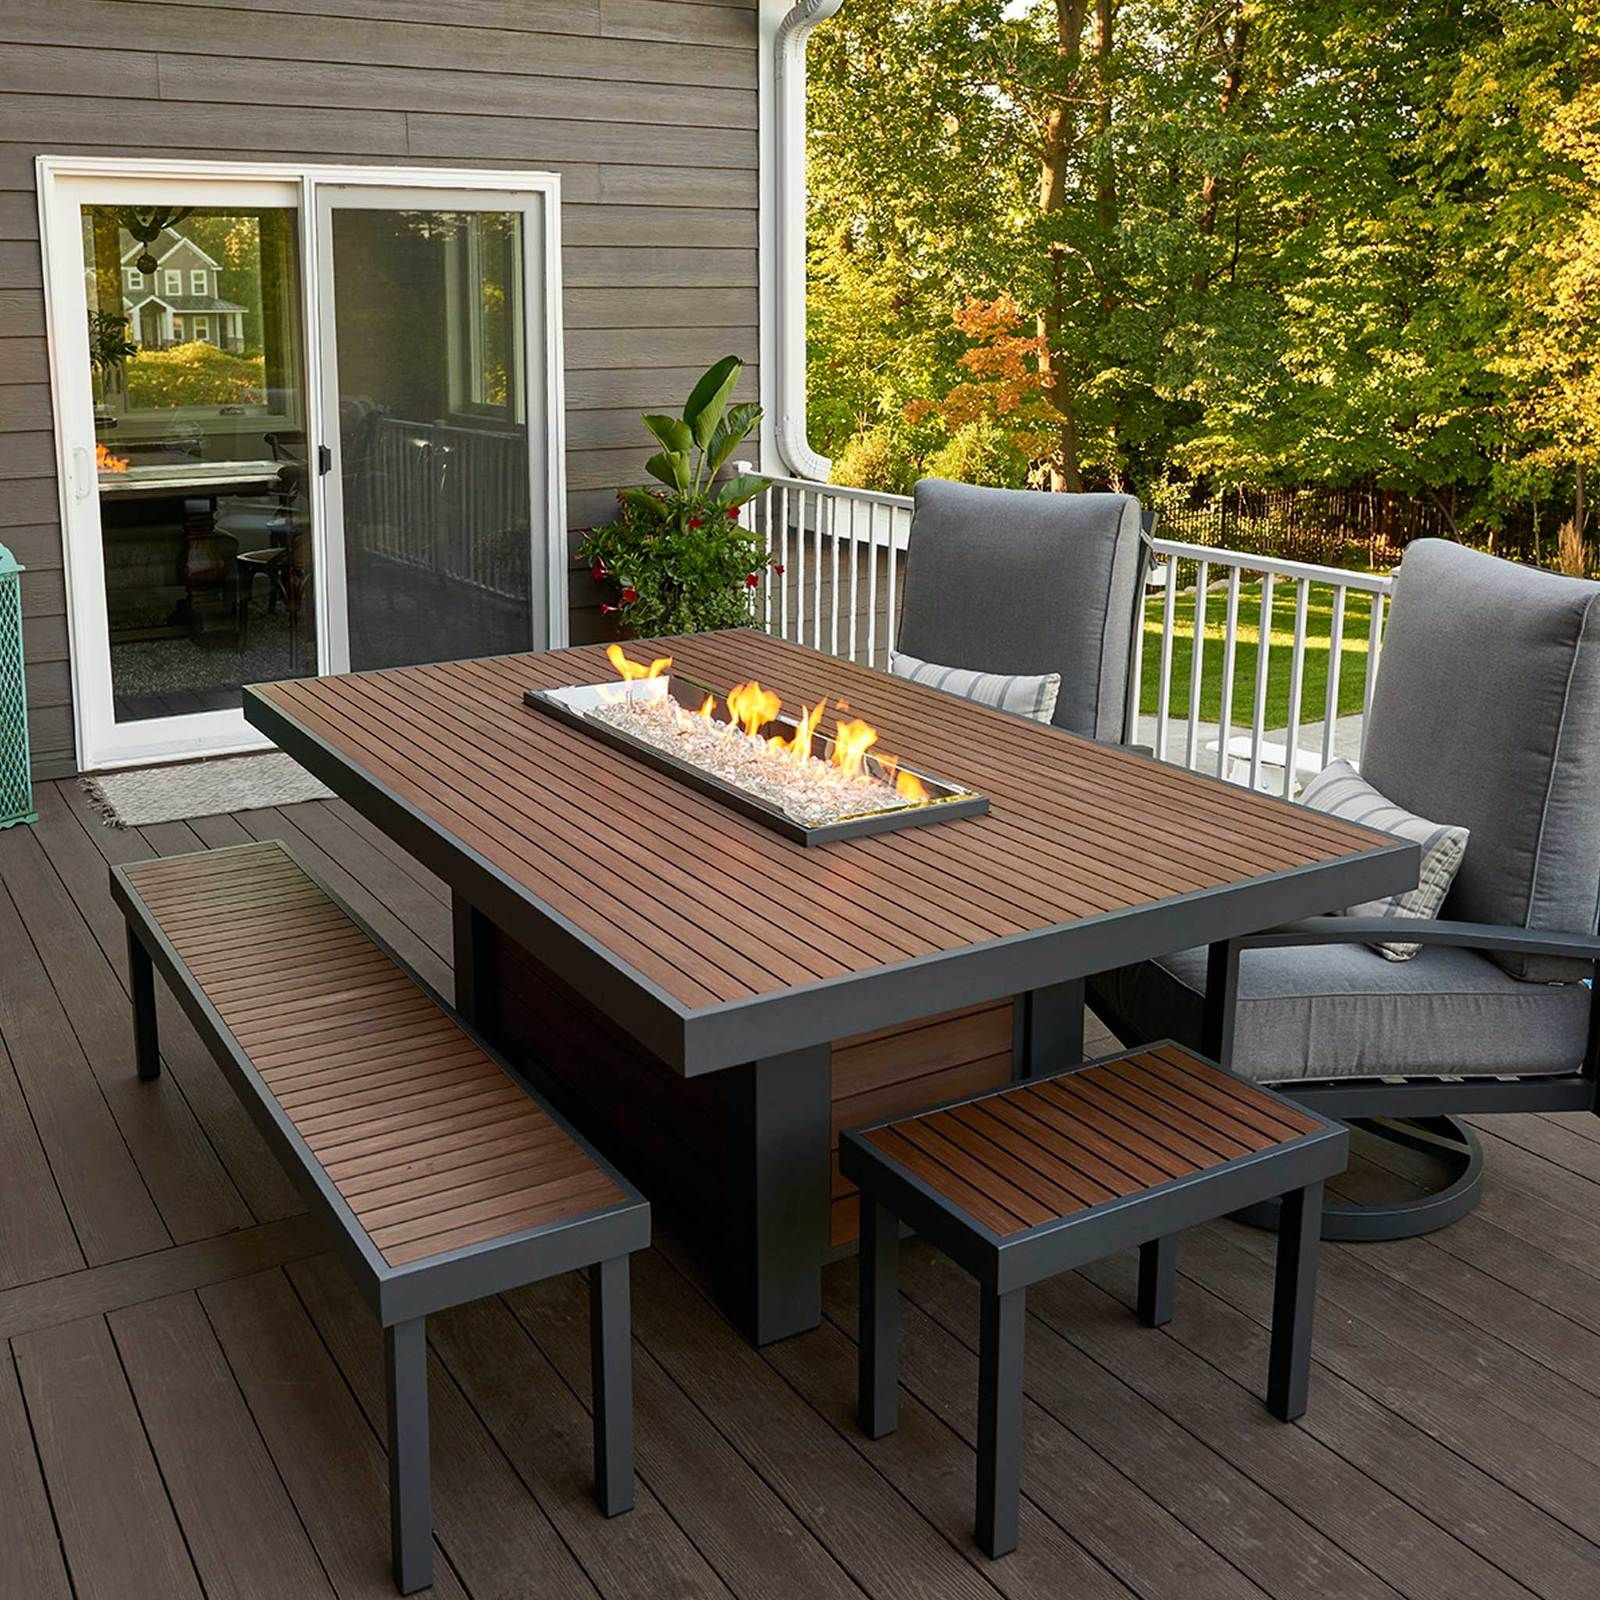 Patio Dining Fire Pit Table - LoveMyPatioClub.com